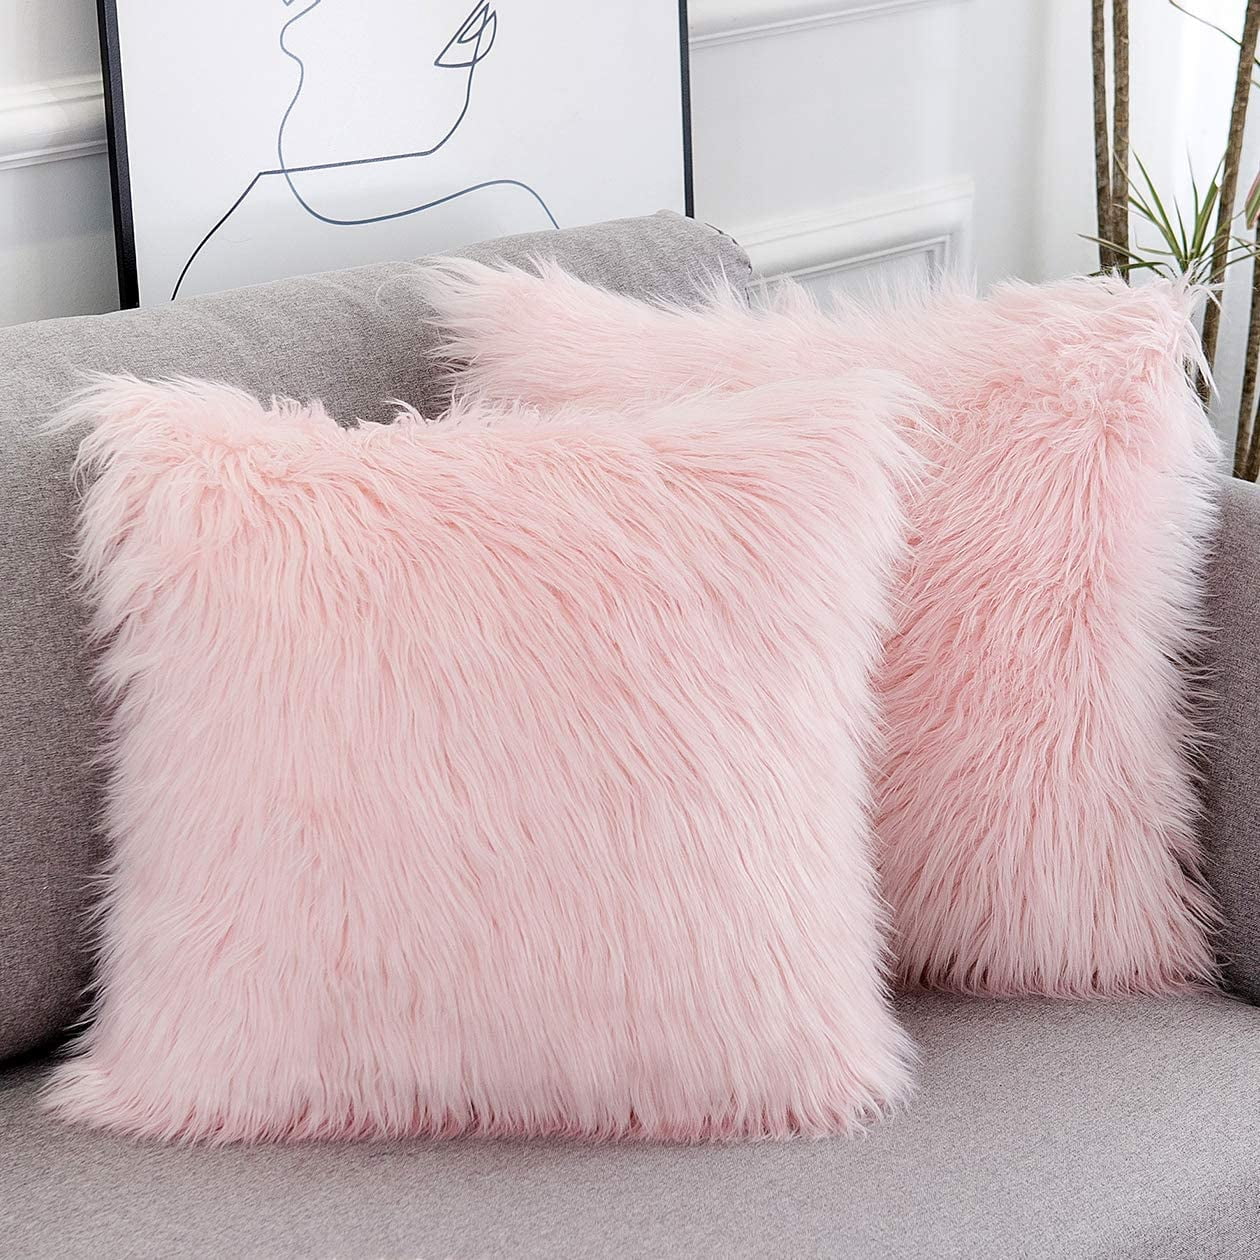 Luxury Faux Rabbit Fur Throw Pillow Covers Fleece Cushion 18x18 Set Of 2  For Fall Decorative Super Soft Fluffy Aesthetic Beach Textured Square  Cojines